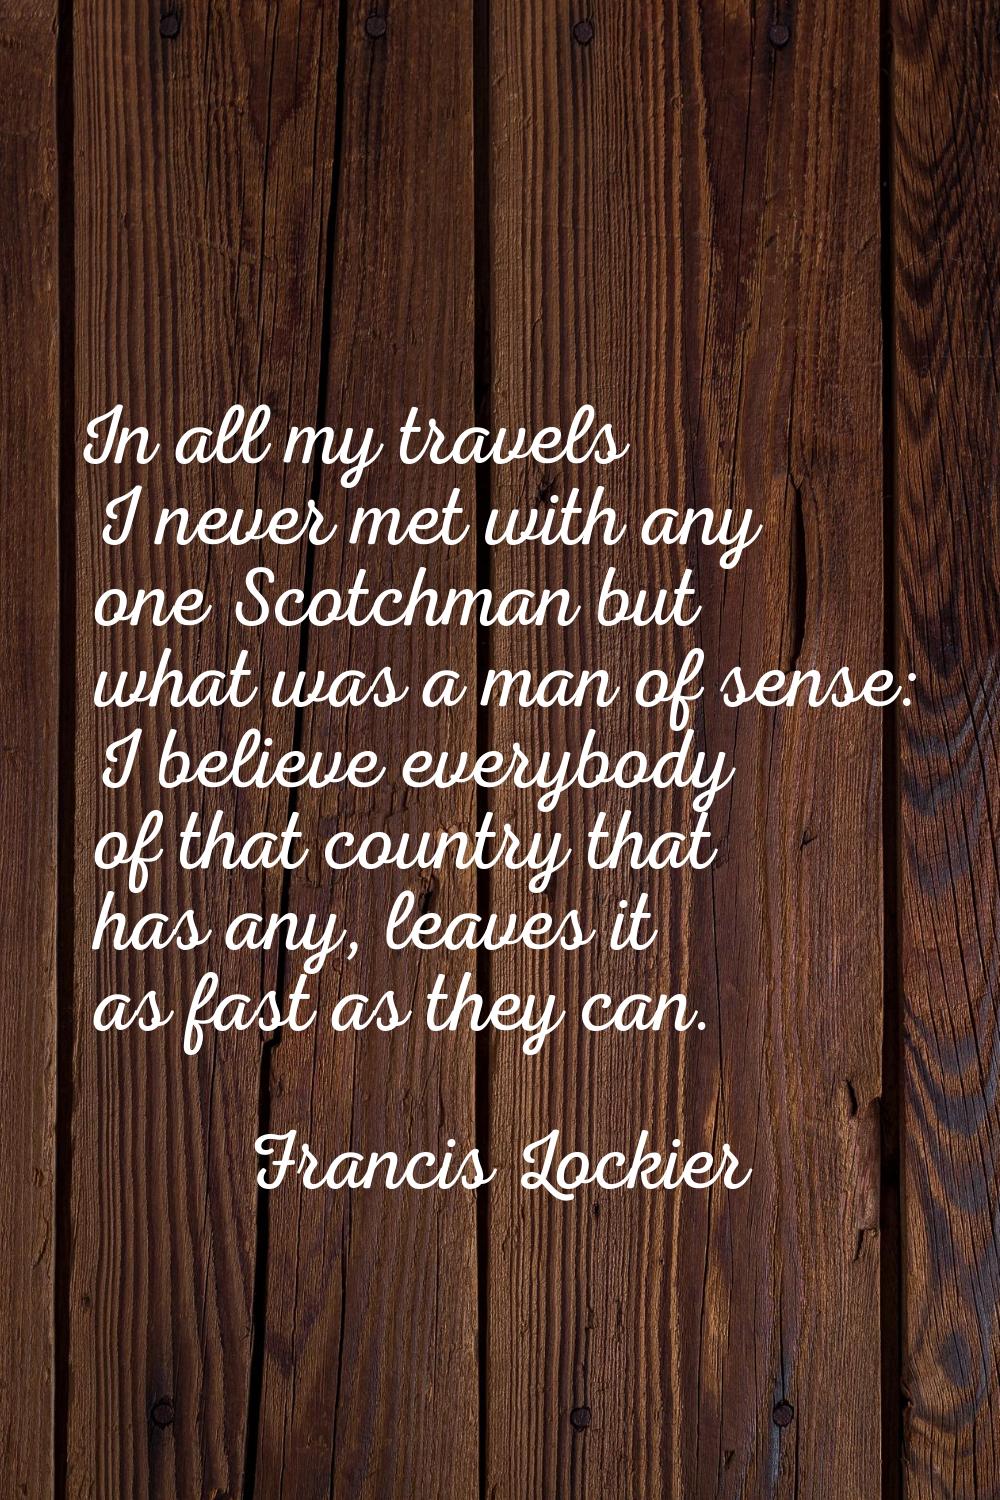 In all my travels I never met with any one Scotchman but what was a man of sense: I believe everybo